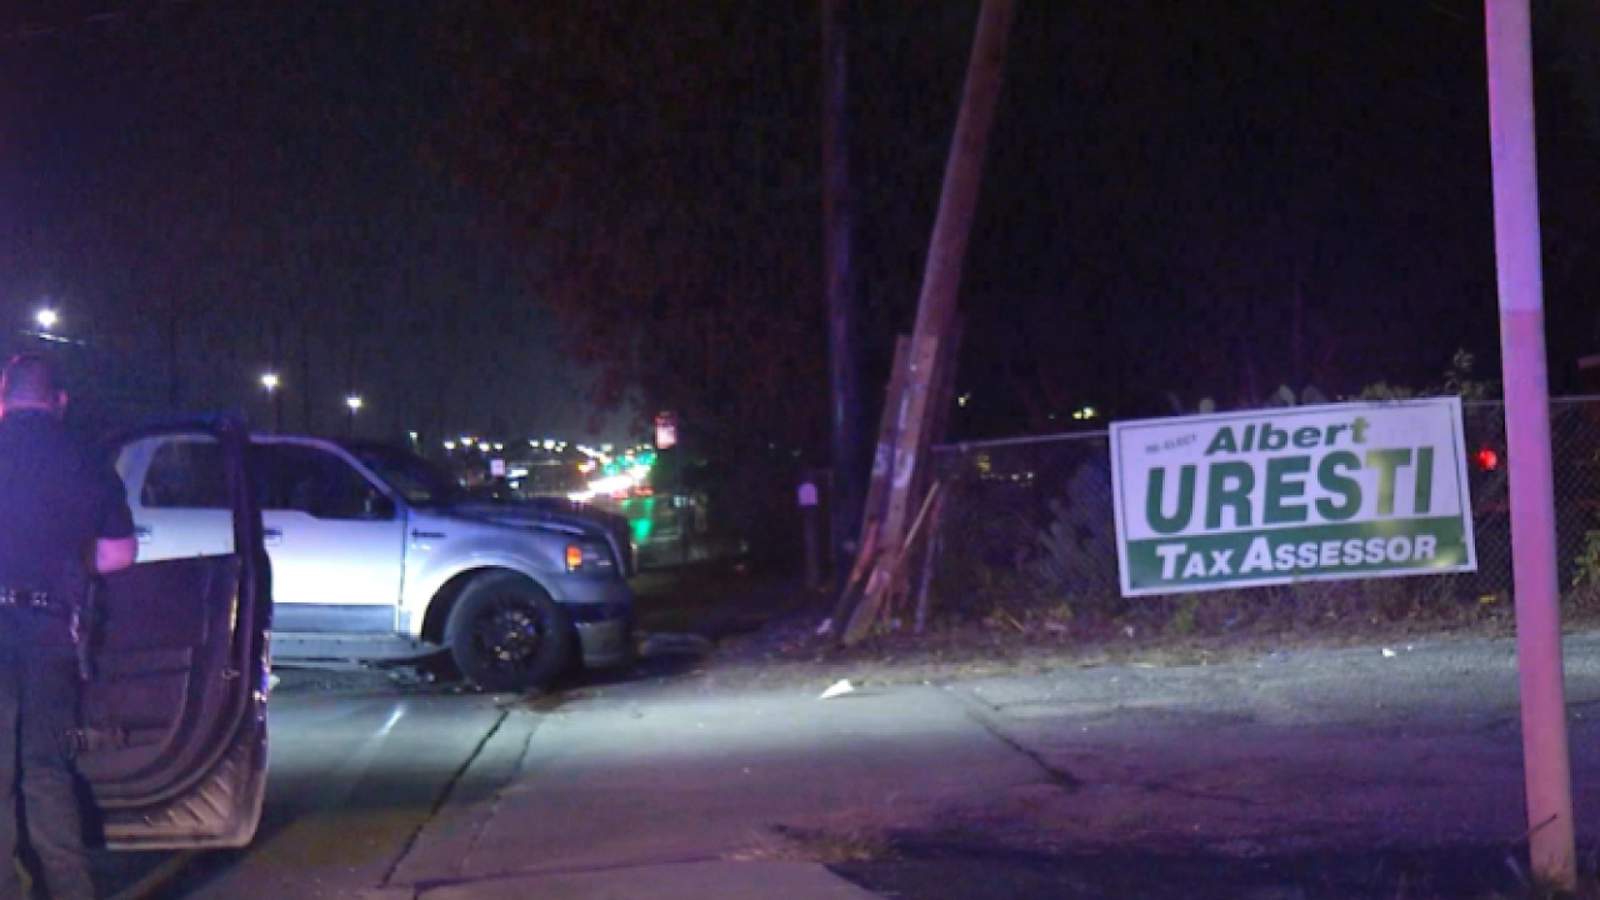 Police search for driver who crashed pickup truck into utility pole